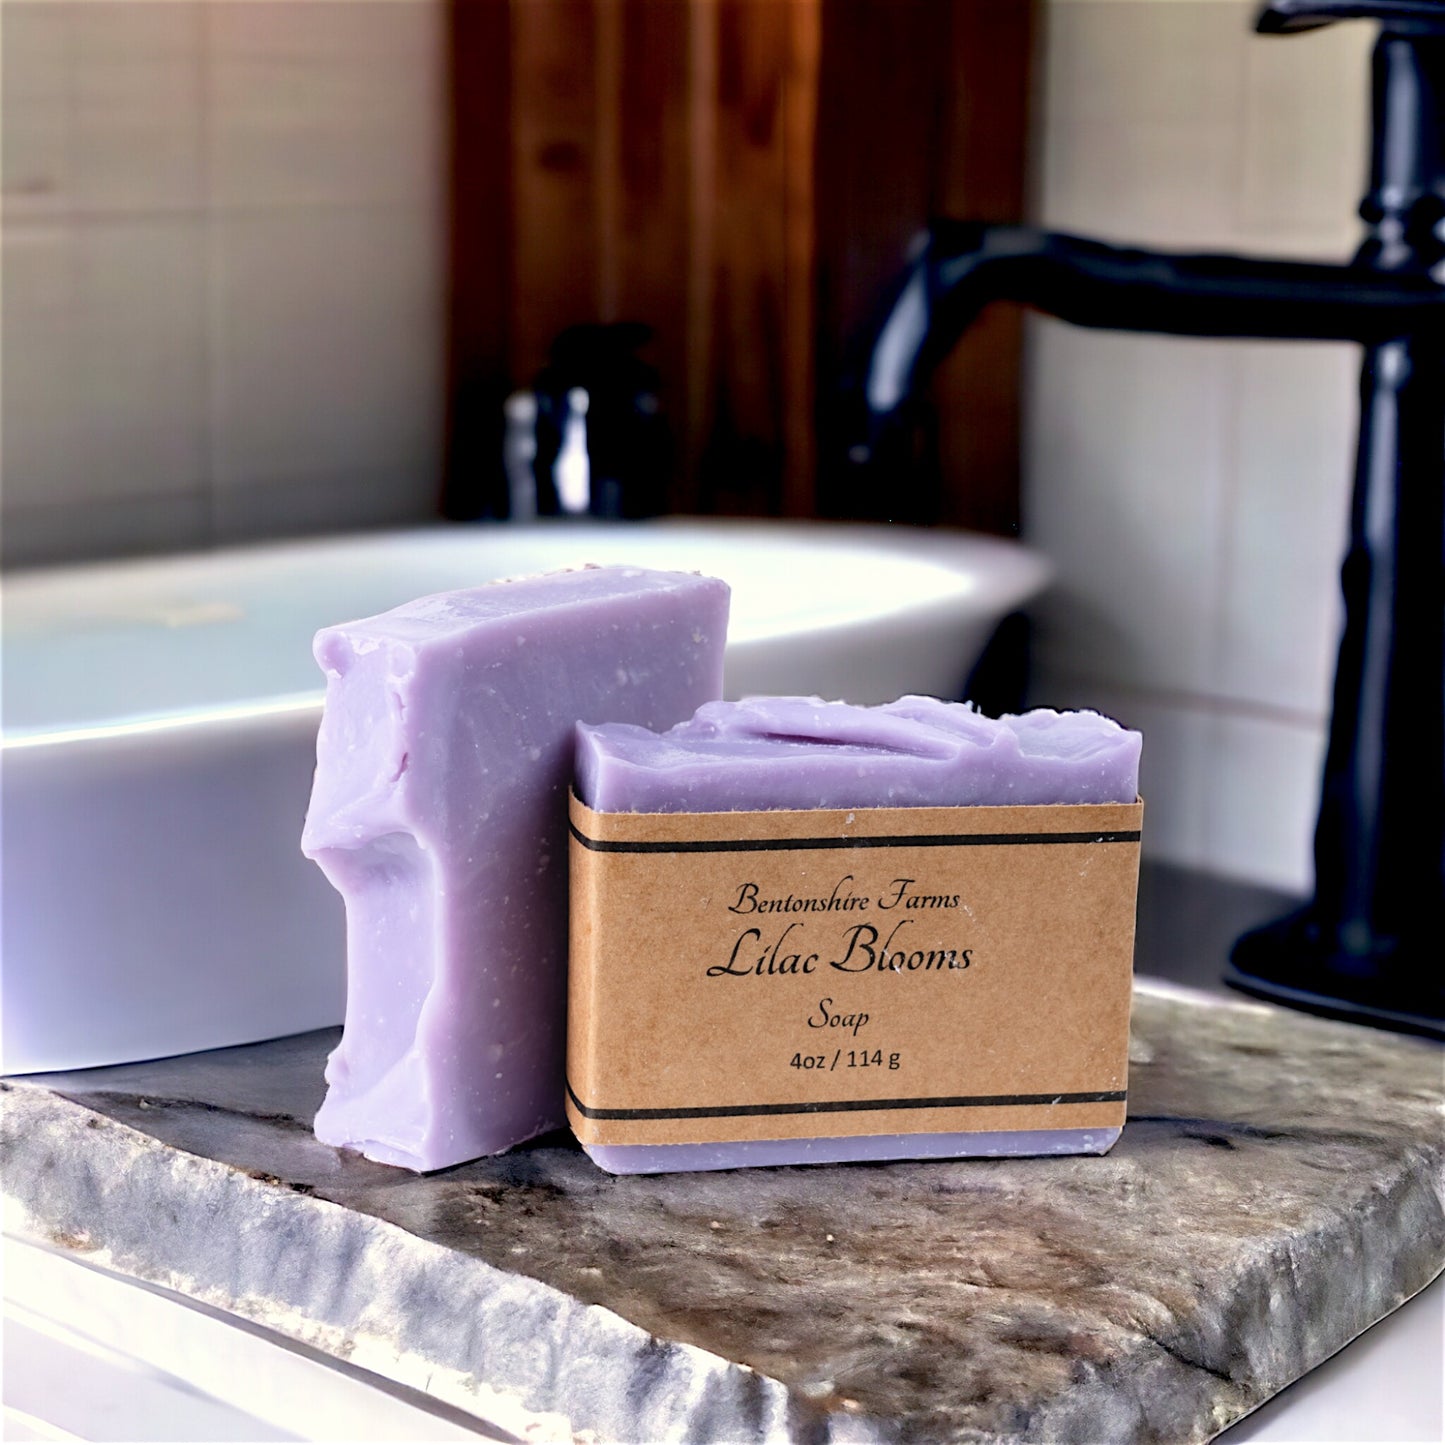 Lilac Blooms Soap